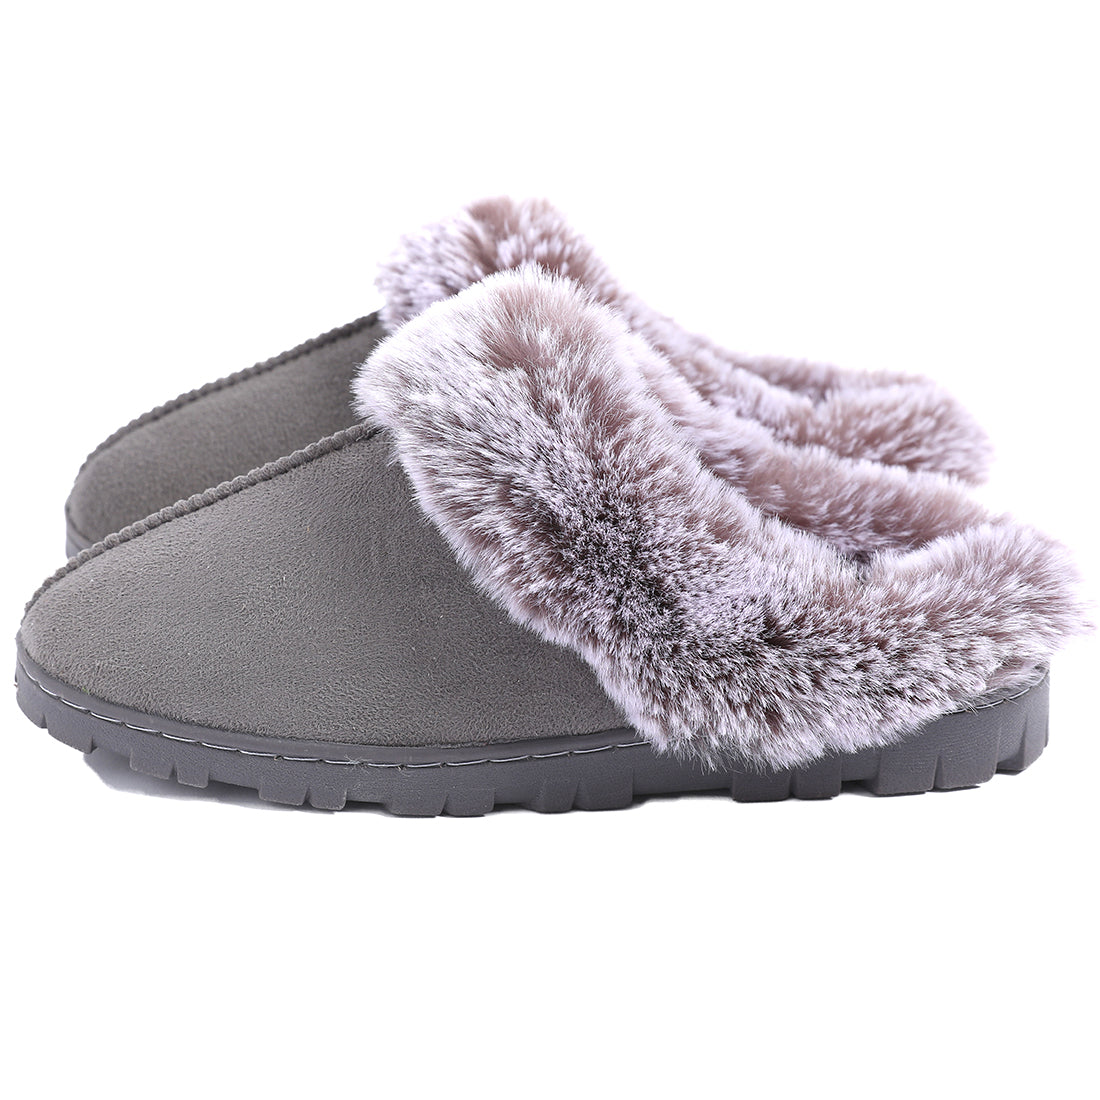 Millffy scuff slippers for women mocassin slippers women fluffy slippers womens clog slippers